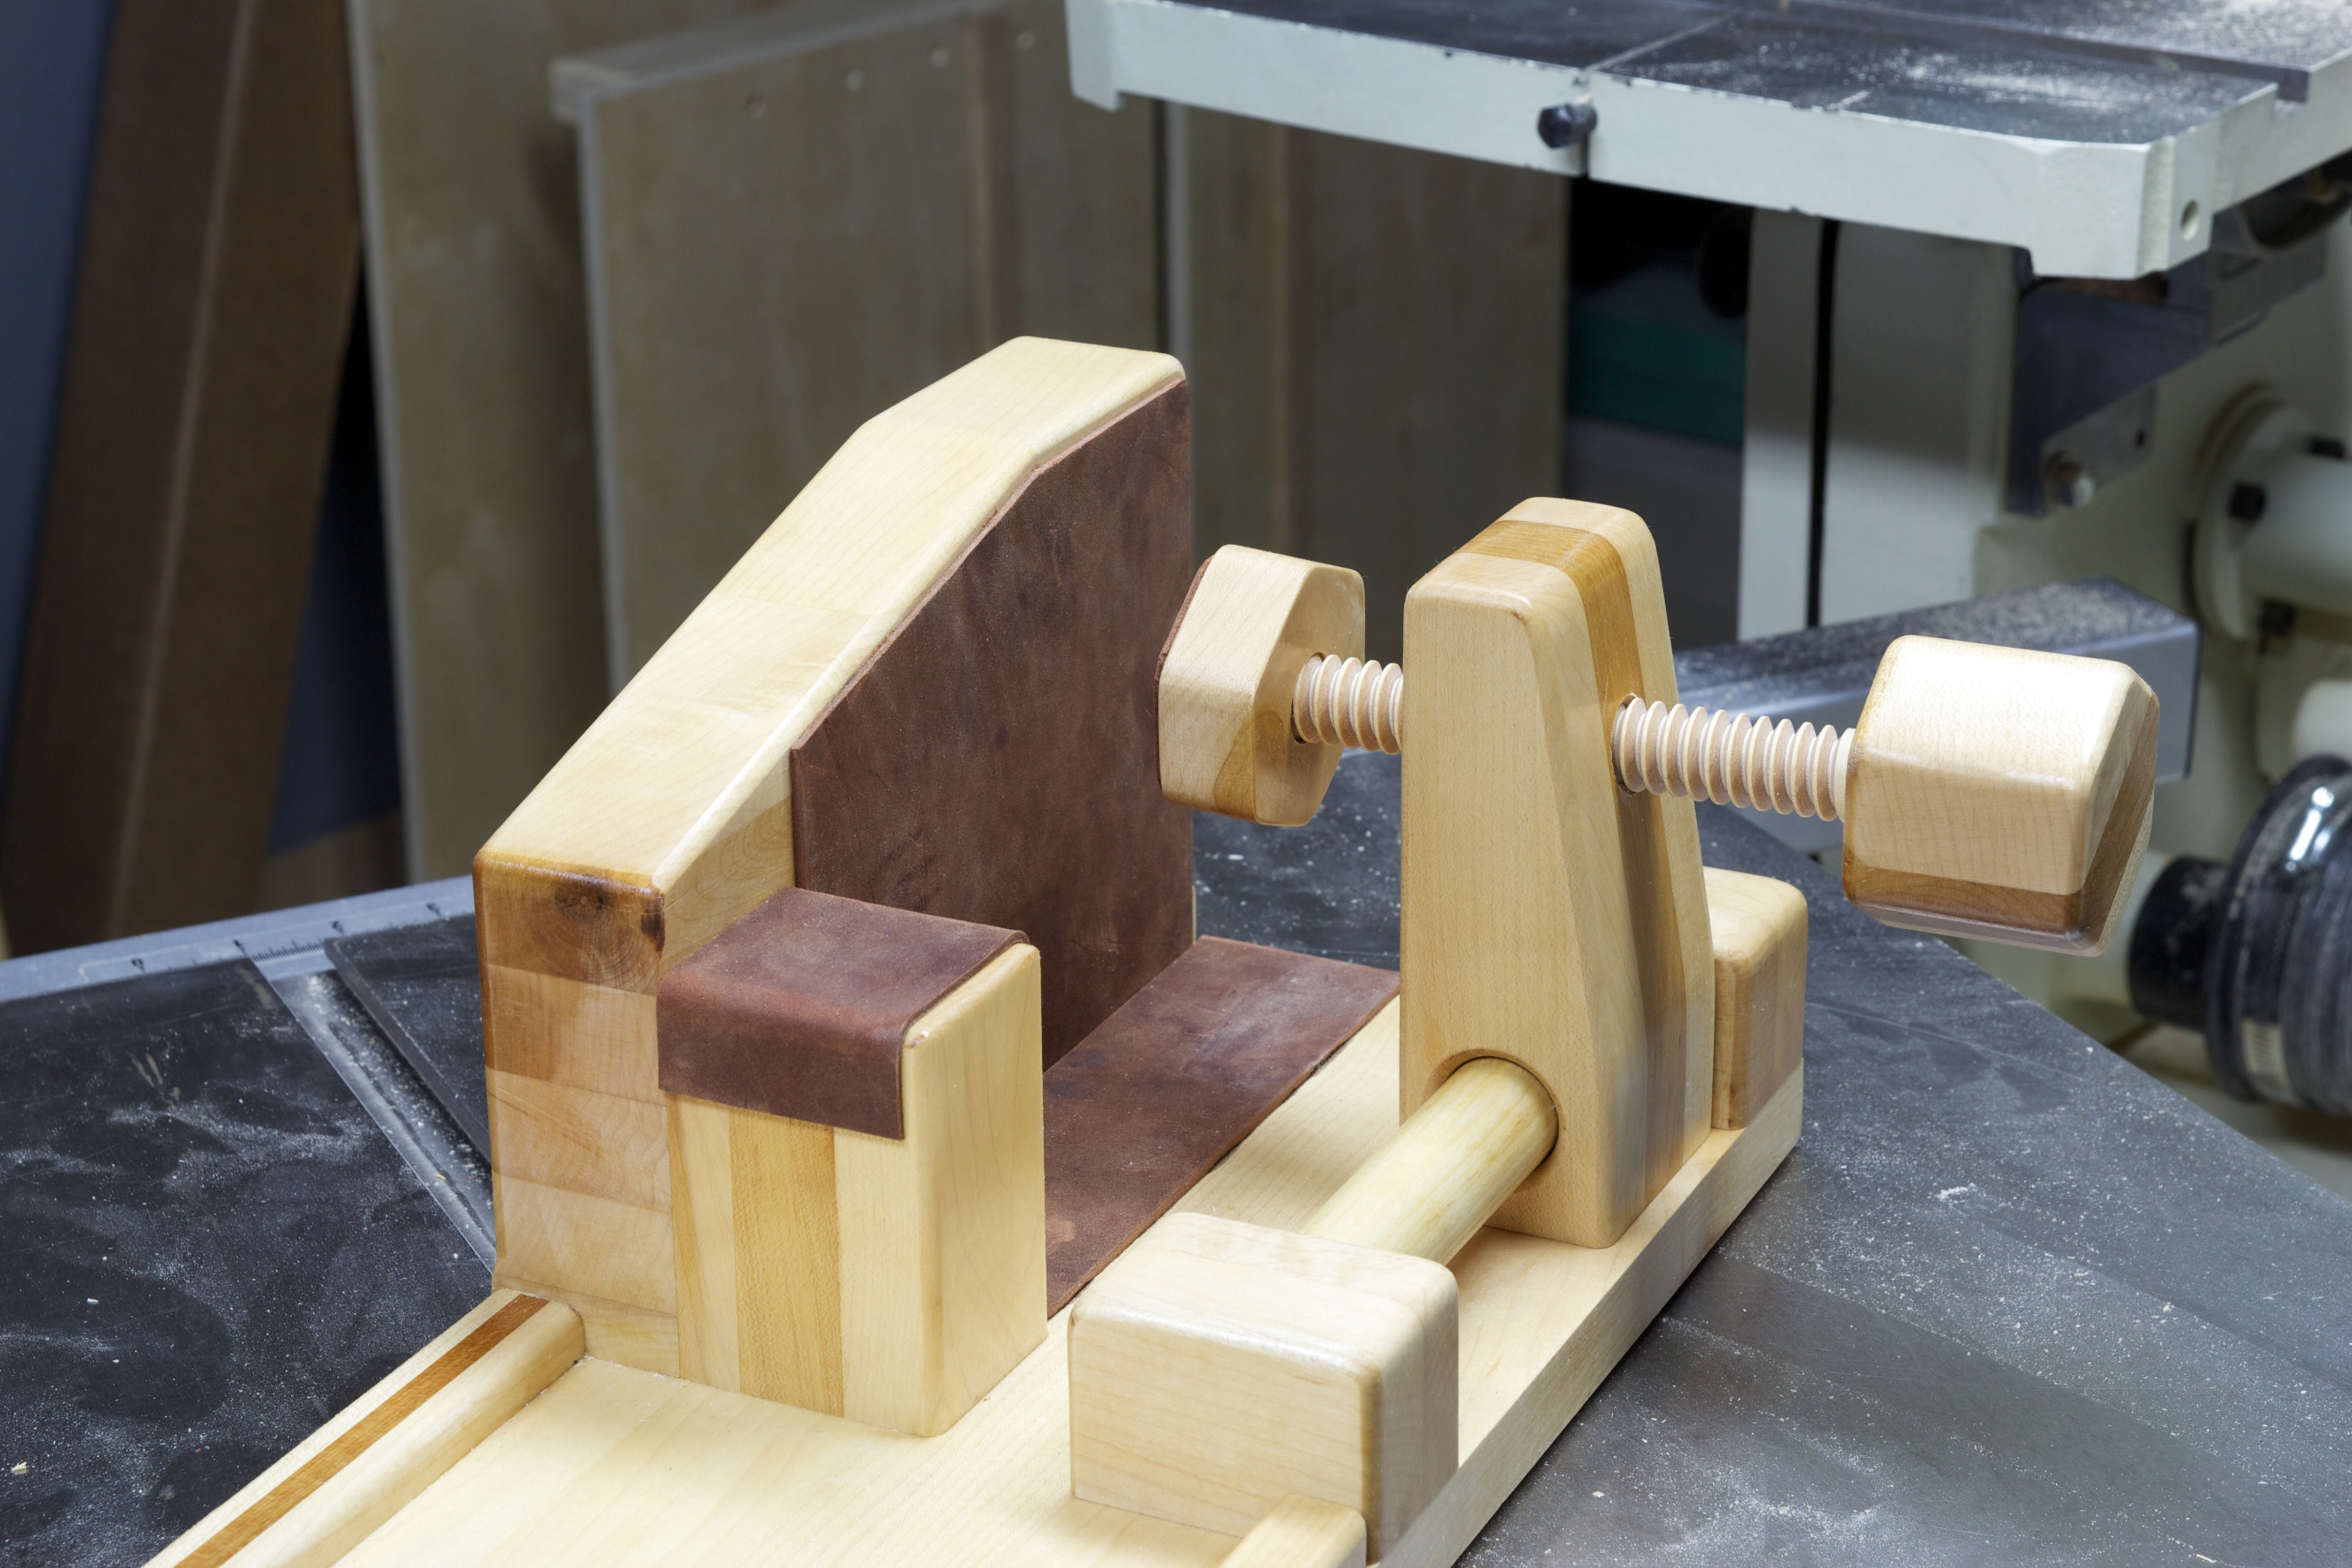 wood-screw type gun vise (I do have plans to make several cam-style 